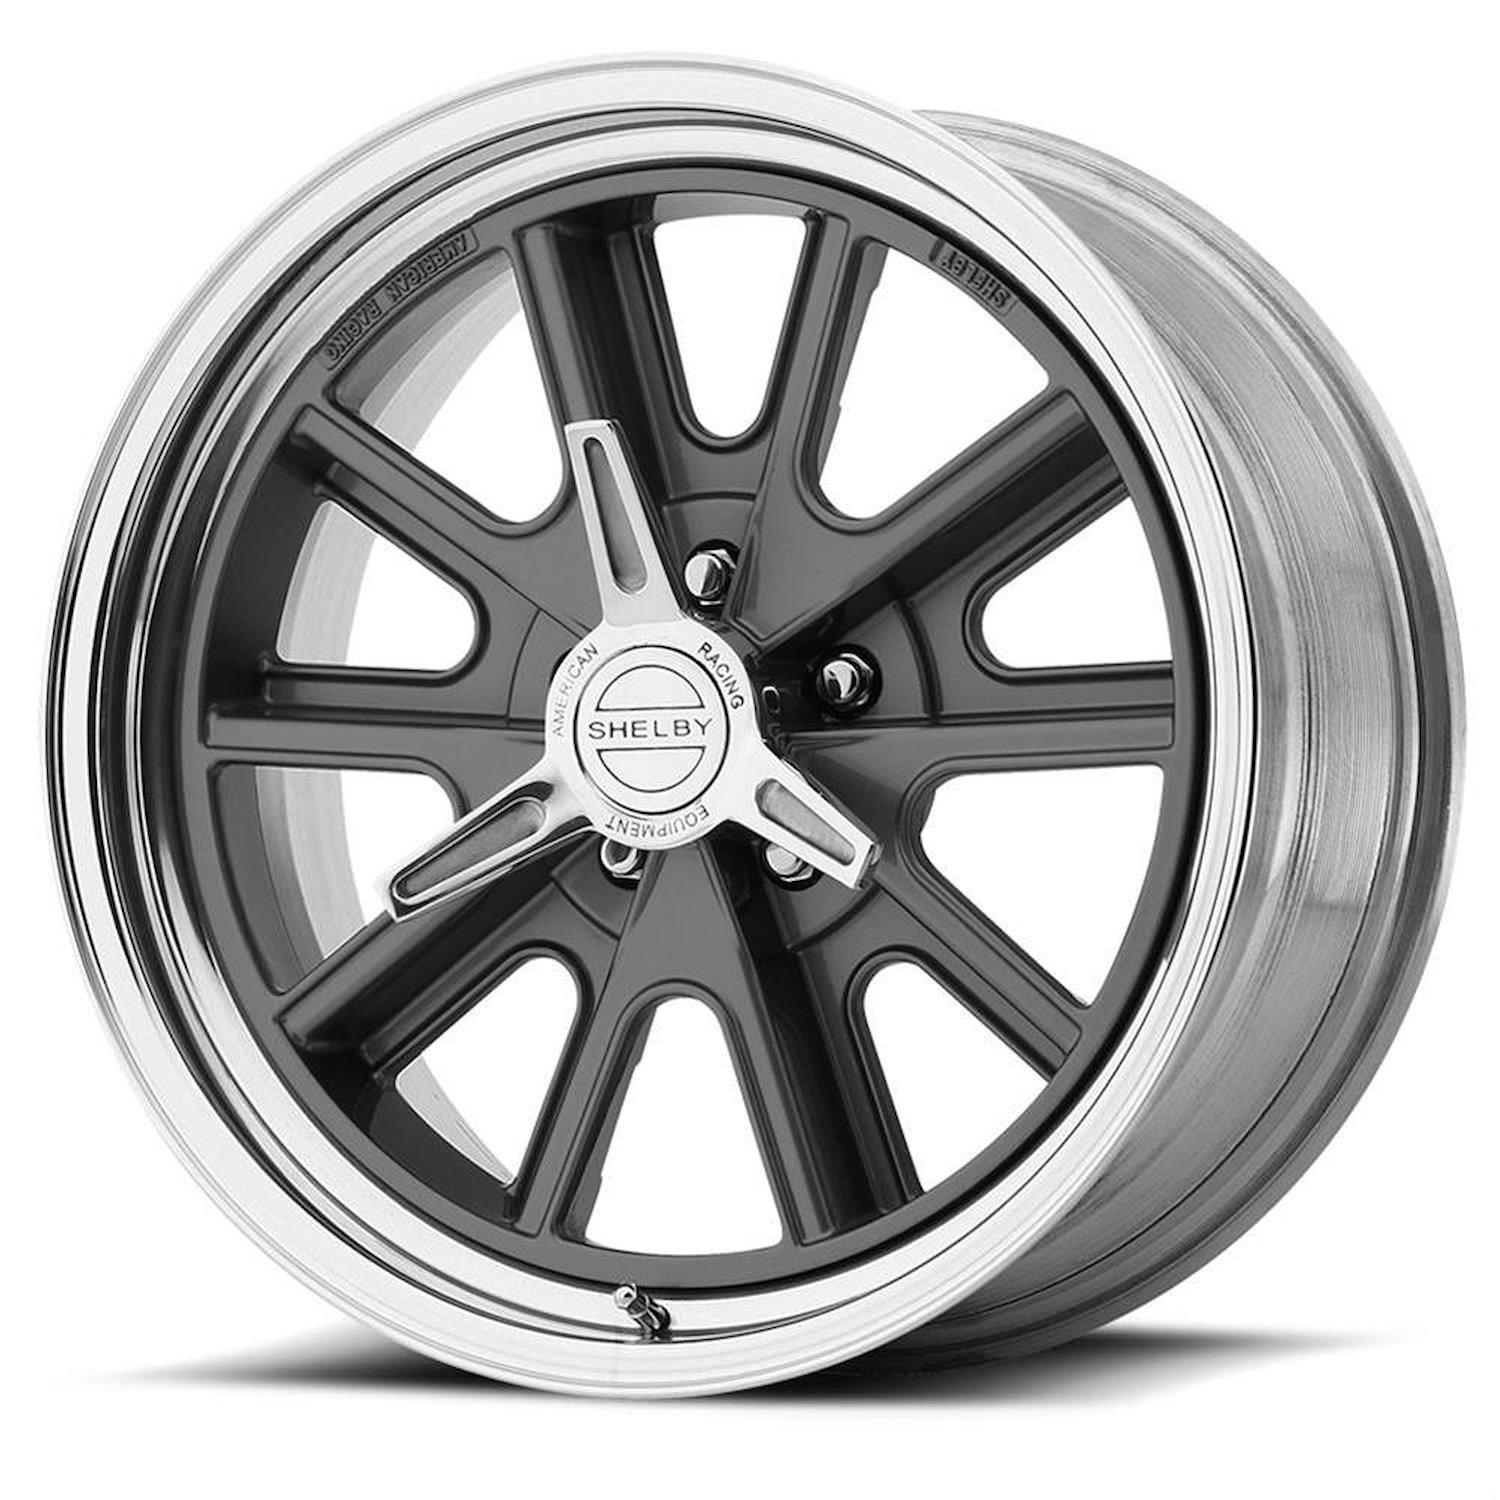 AMERICAN RACING 427 SHELBY COBRA TWO-PIECE MAG GRAY CENTER POLISHED BARREL 15 x 8 5X4.75 -6 4.26